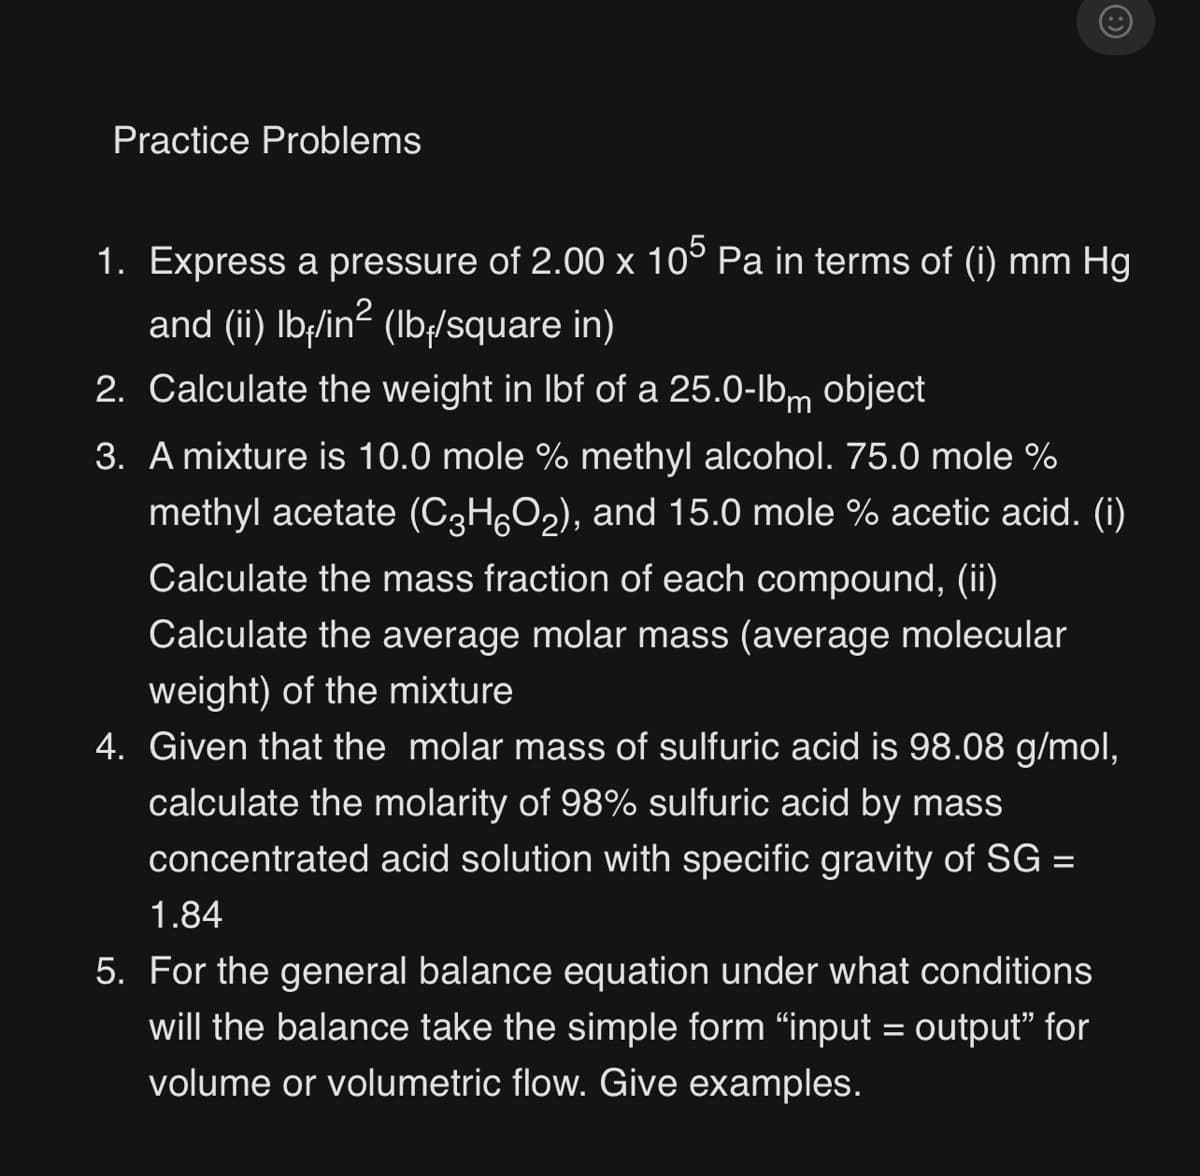 Practice Problems
1. Express a pressure of 2.00 x 105 Pa in terms of (i) mm Hg
and (ii) lbﬁ/in² (lbﬁ/square in)
2. Calculate the weight in lbf of a 25.0-lbm object
3. A mixture is 10.0 mole % methyl alcohol. 75.0 mole %
methyl acetate (C³H6O₂), and 15.0 mole % acetic acid. (i)
Calculate the mass fraction of each compound, (ii)
Calculate the average molar mass (average molecular
weight) of the mixture
4. Given that the molar mass of sulfuric acid is 98.08 g/mol,
calculate the molarity of 98% sulfuric acid by mass
concentrated acid solution with specific gravity of SG =
1.84
5. For the general balance equation under what conditions
will the balance take the simple form "input = output" for
volume or volumetric flow. Give examples.